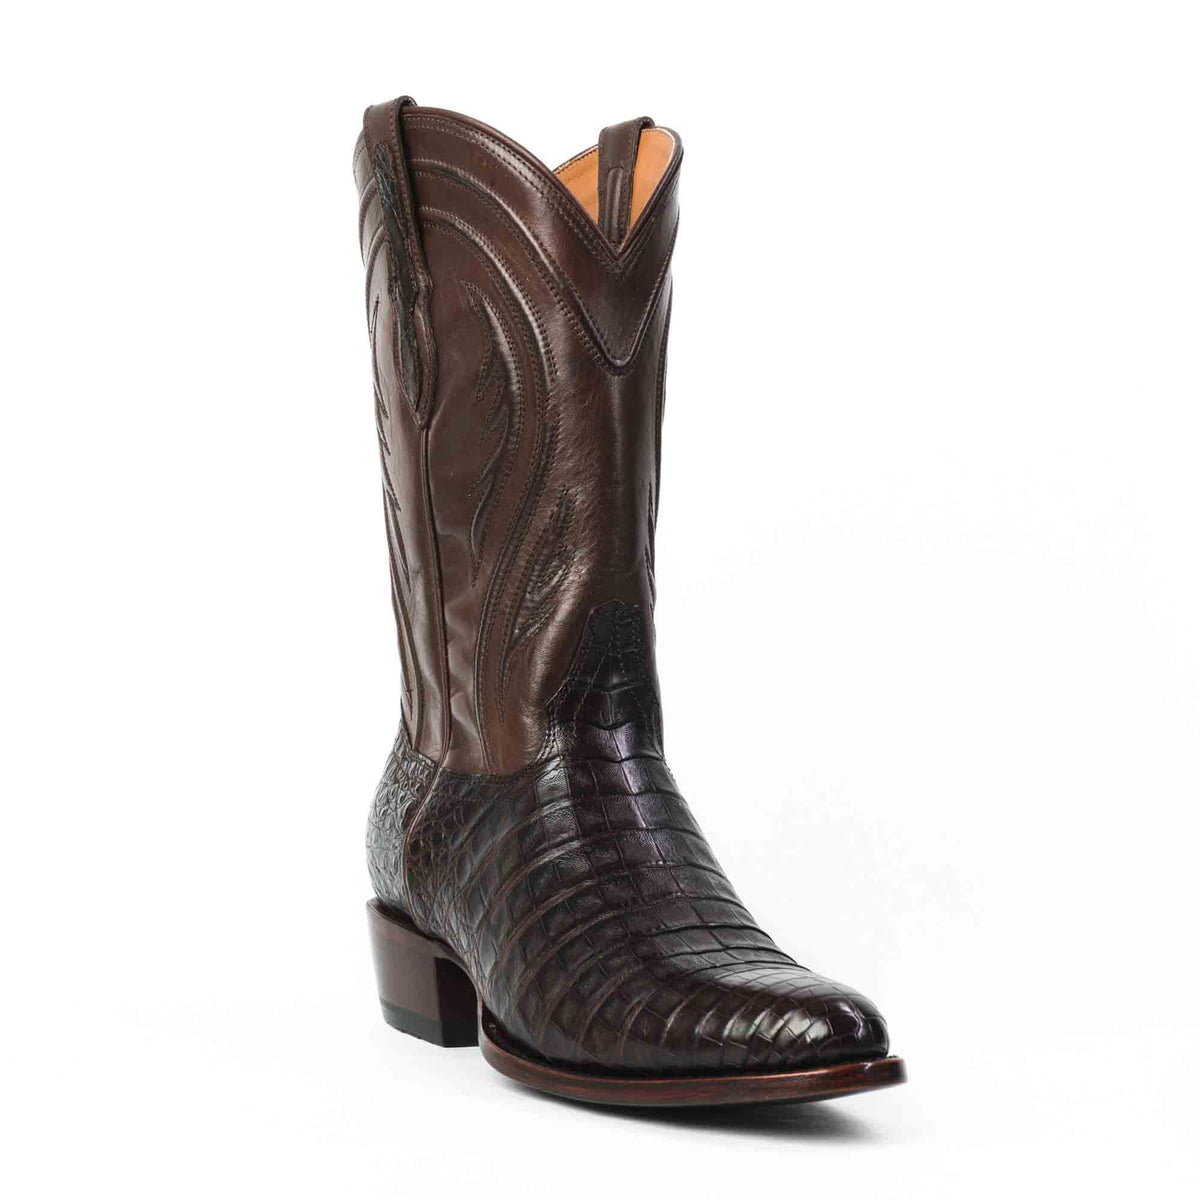 Men's Caiman Belly Western Boots | The Arturo | Rujo Boots